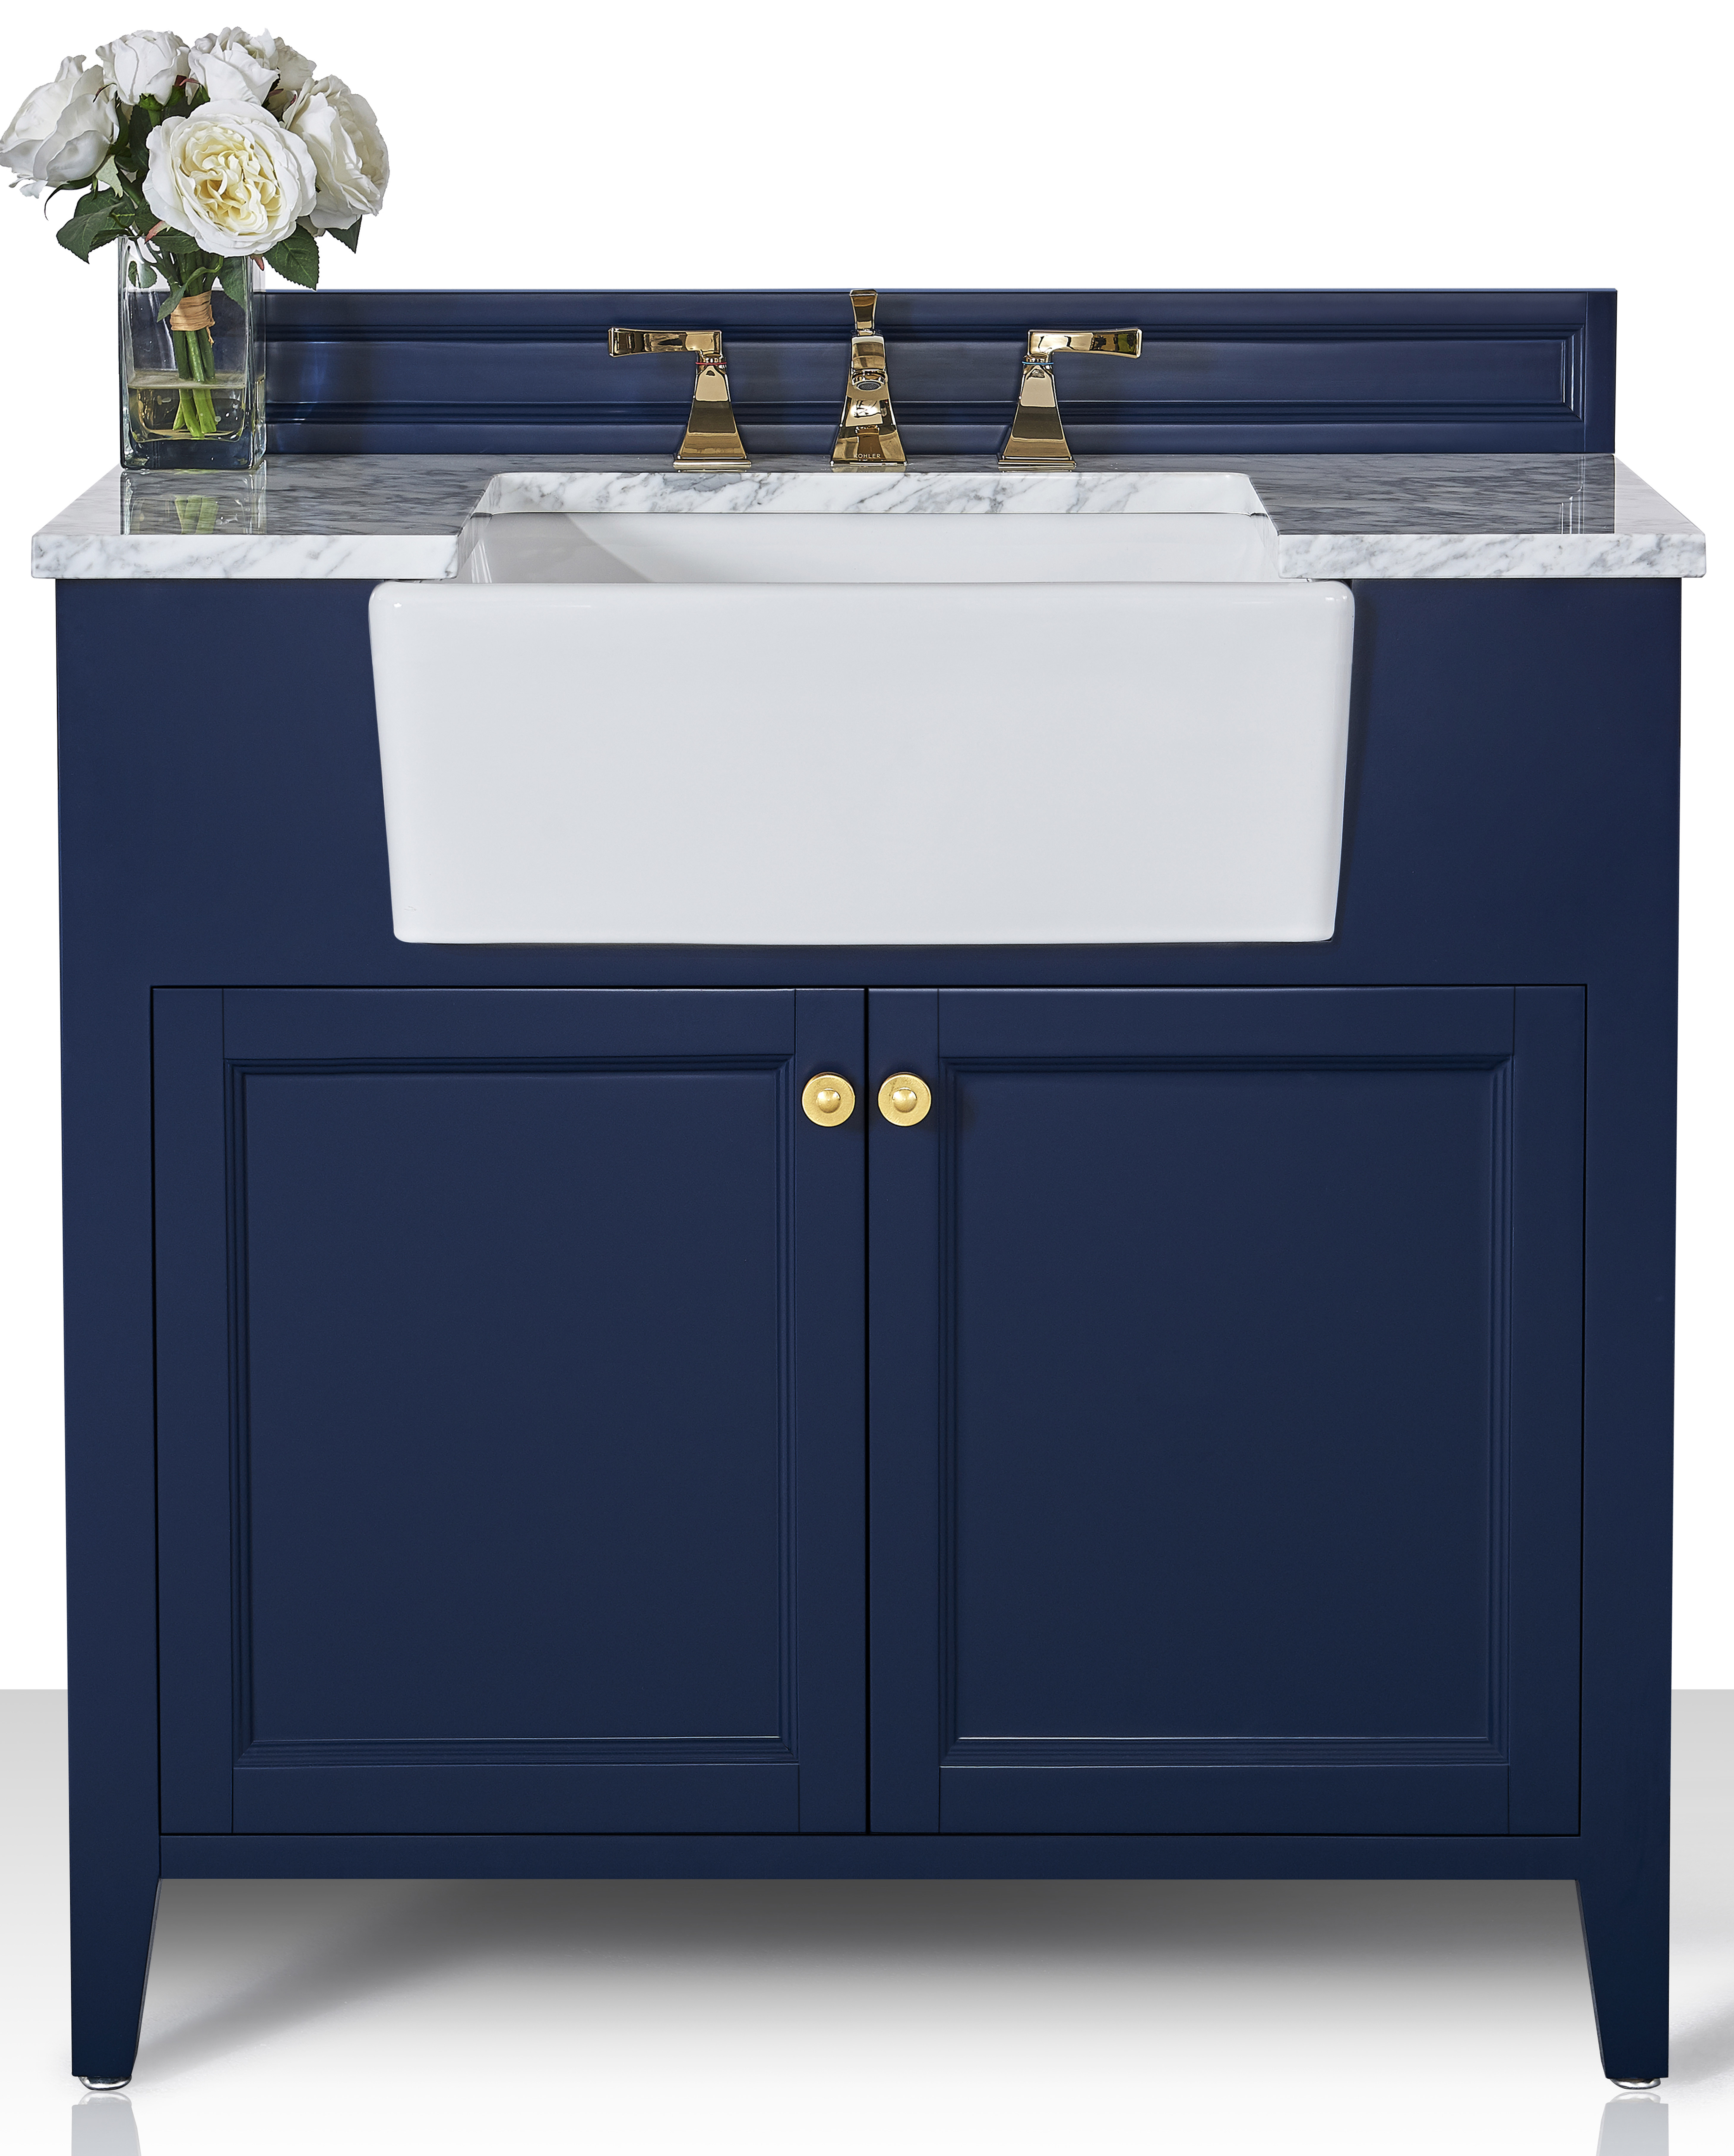 36" Bath Vanity Set in Heritage Blue with Italian Carrara White Marble Vanity Top and White Undermount Basin with Gold Hardware